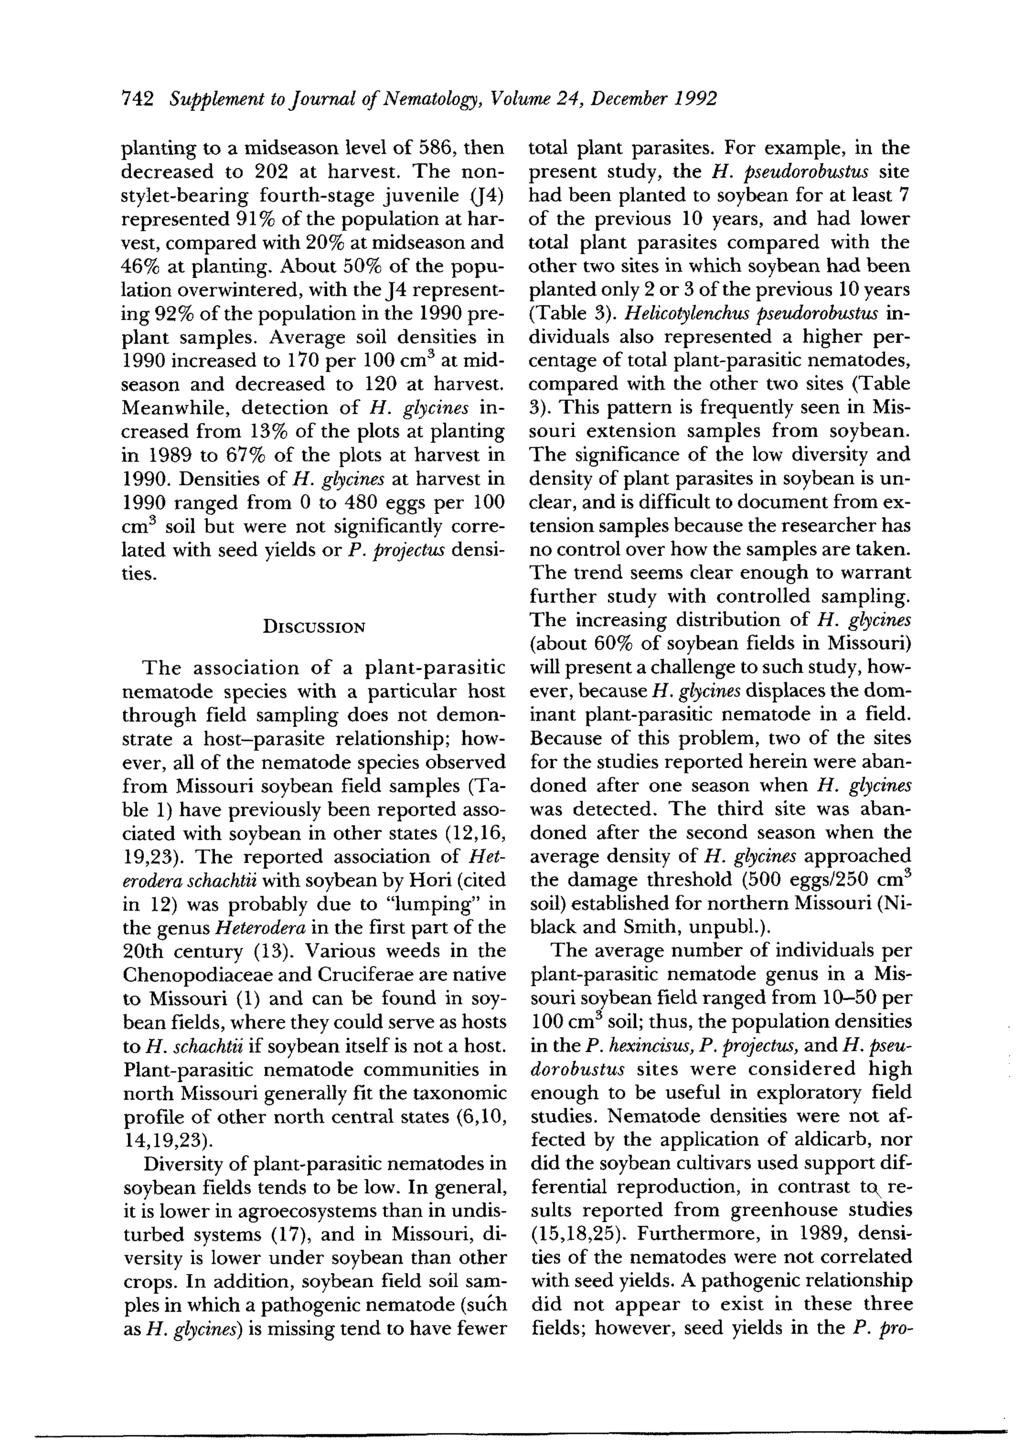 742 Supplement to Journal of Nematology, Volume 24, December 1992 planting to a midseason level of 586, then decreased to 202 at harvest.